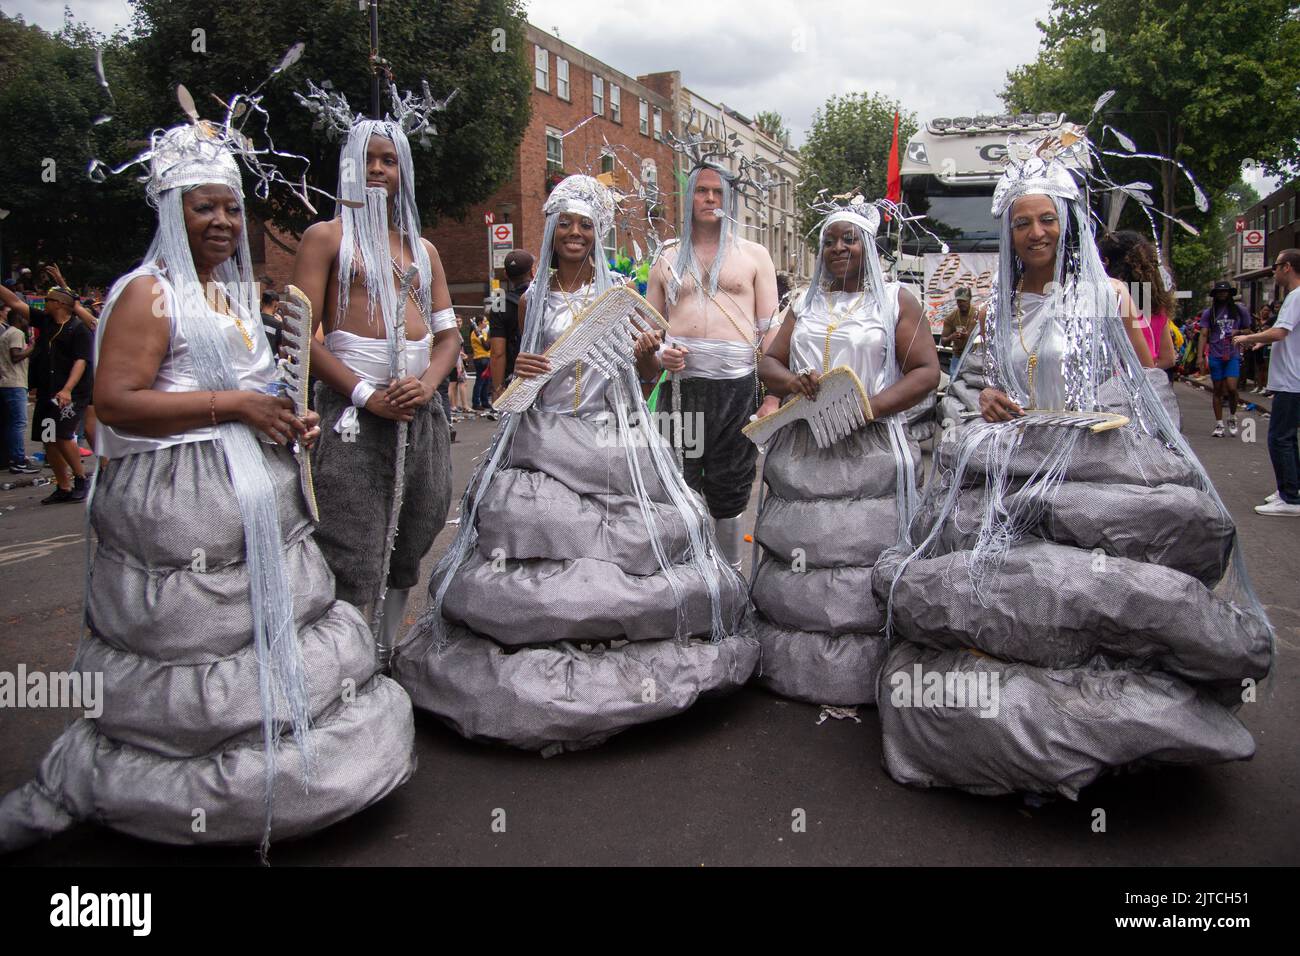 London, UK. 29th Aug, 2022. On Da Road with COCOYEA at Notting Hill Carnival 2022. Follow mas band COCOYEA through Notting Hill Carnival which is back after the years of COVID. Fantasy costumes and regional dress beguiled the eye and a man from Brazil rode a Tyrannosaurus Rex. Credit: Peter Hogan/Alamy Live News Stock Photo